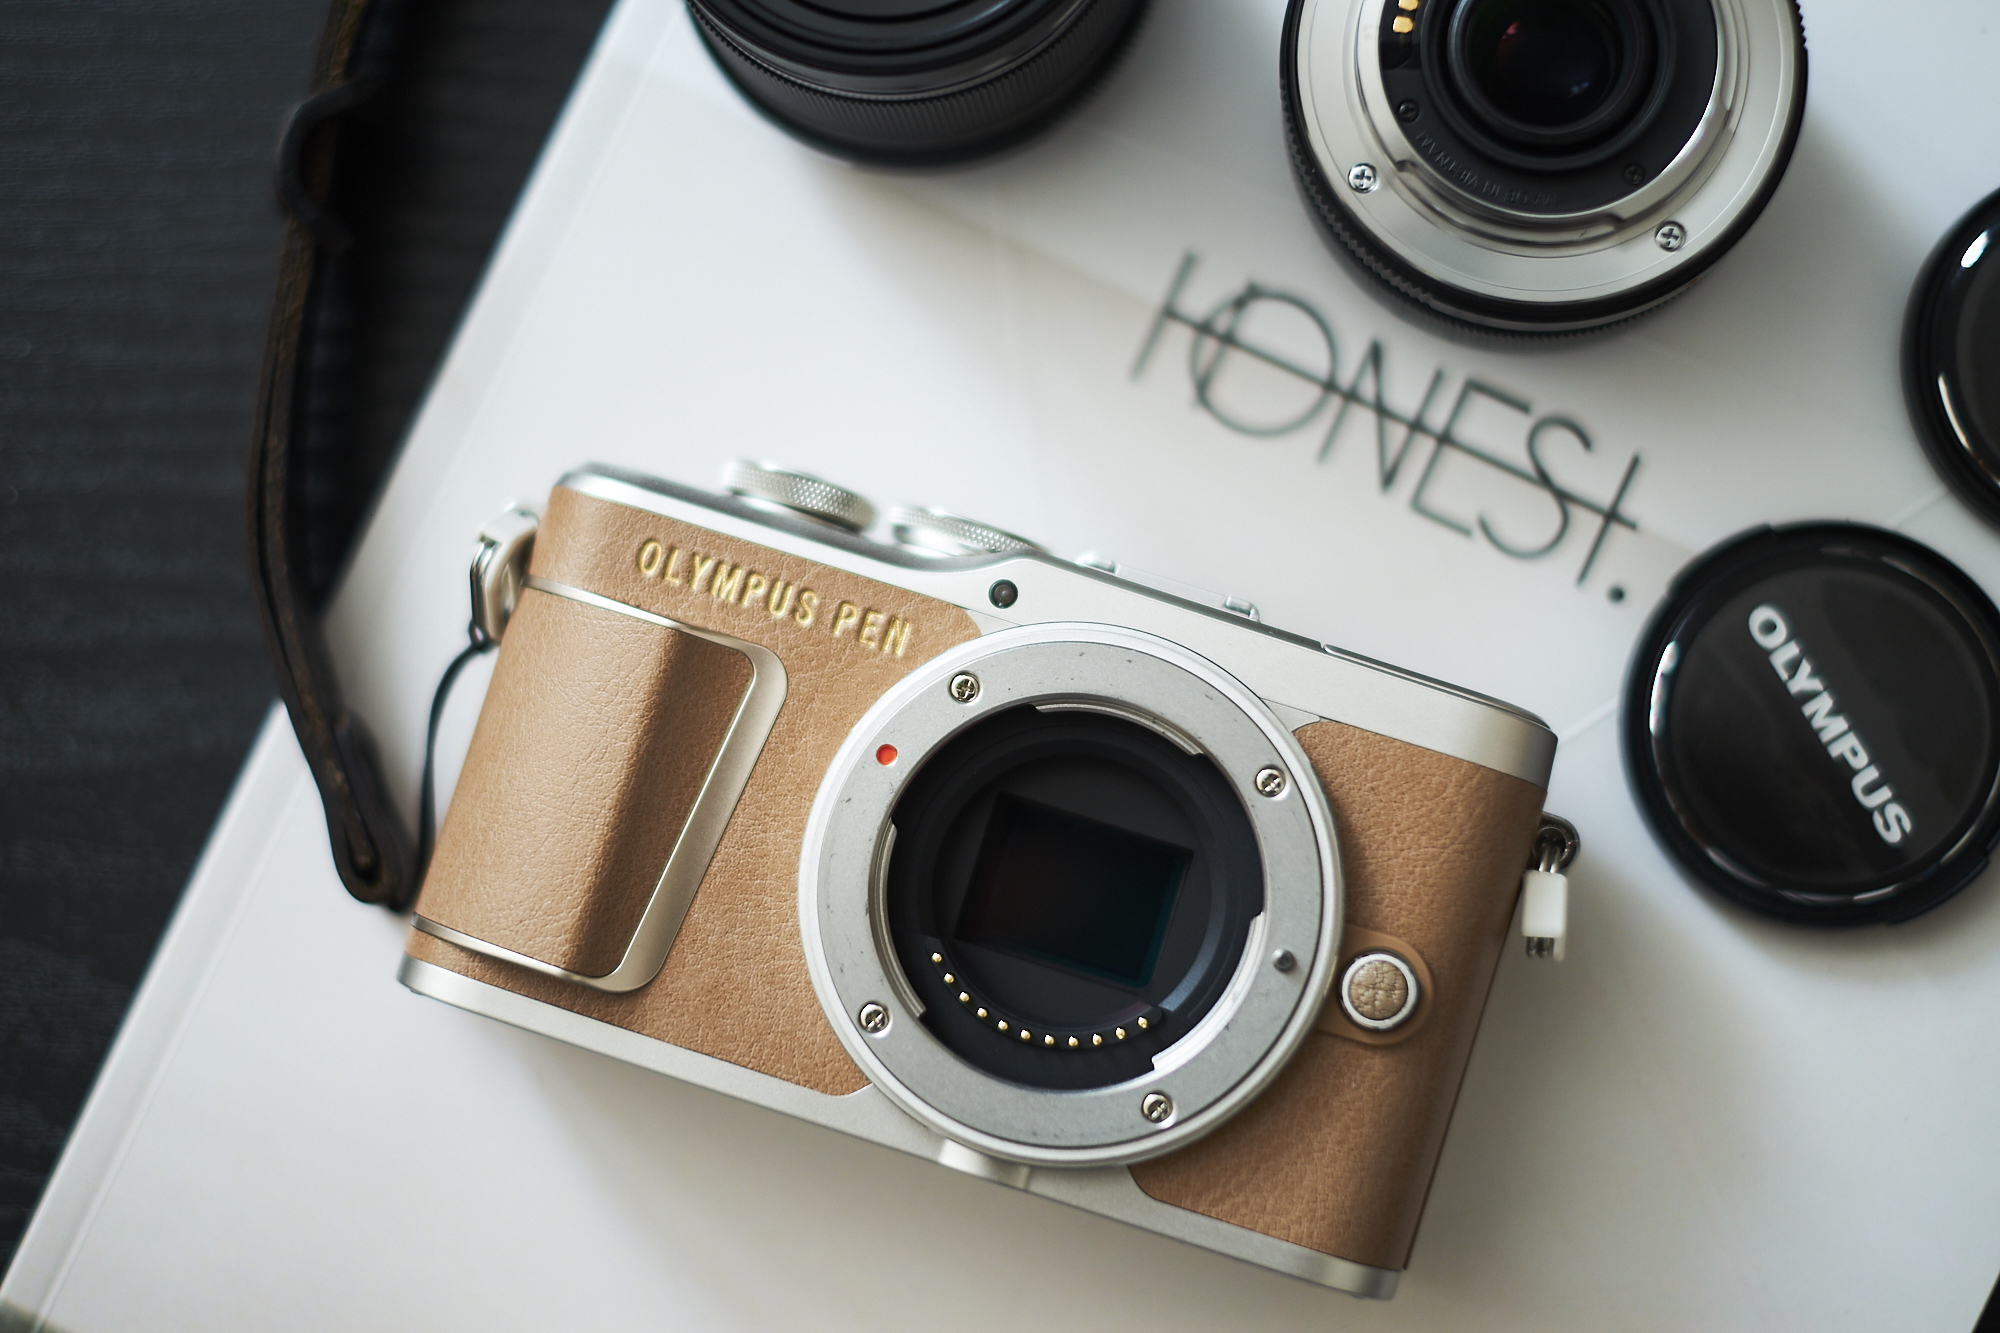 Review: Olympus EPL9 (Or, Why and How I Fell Back in Love with Olympus)